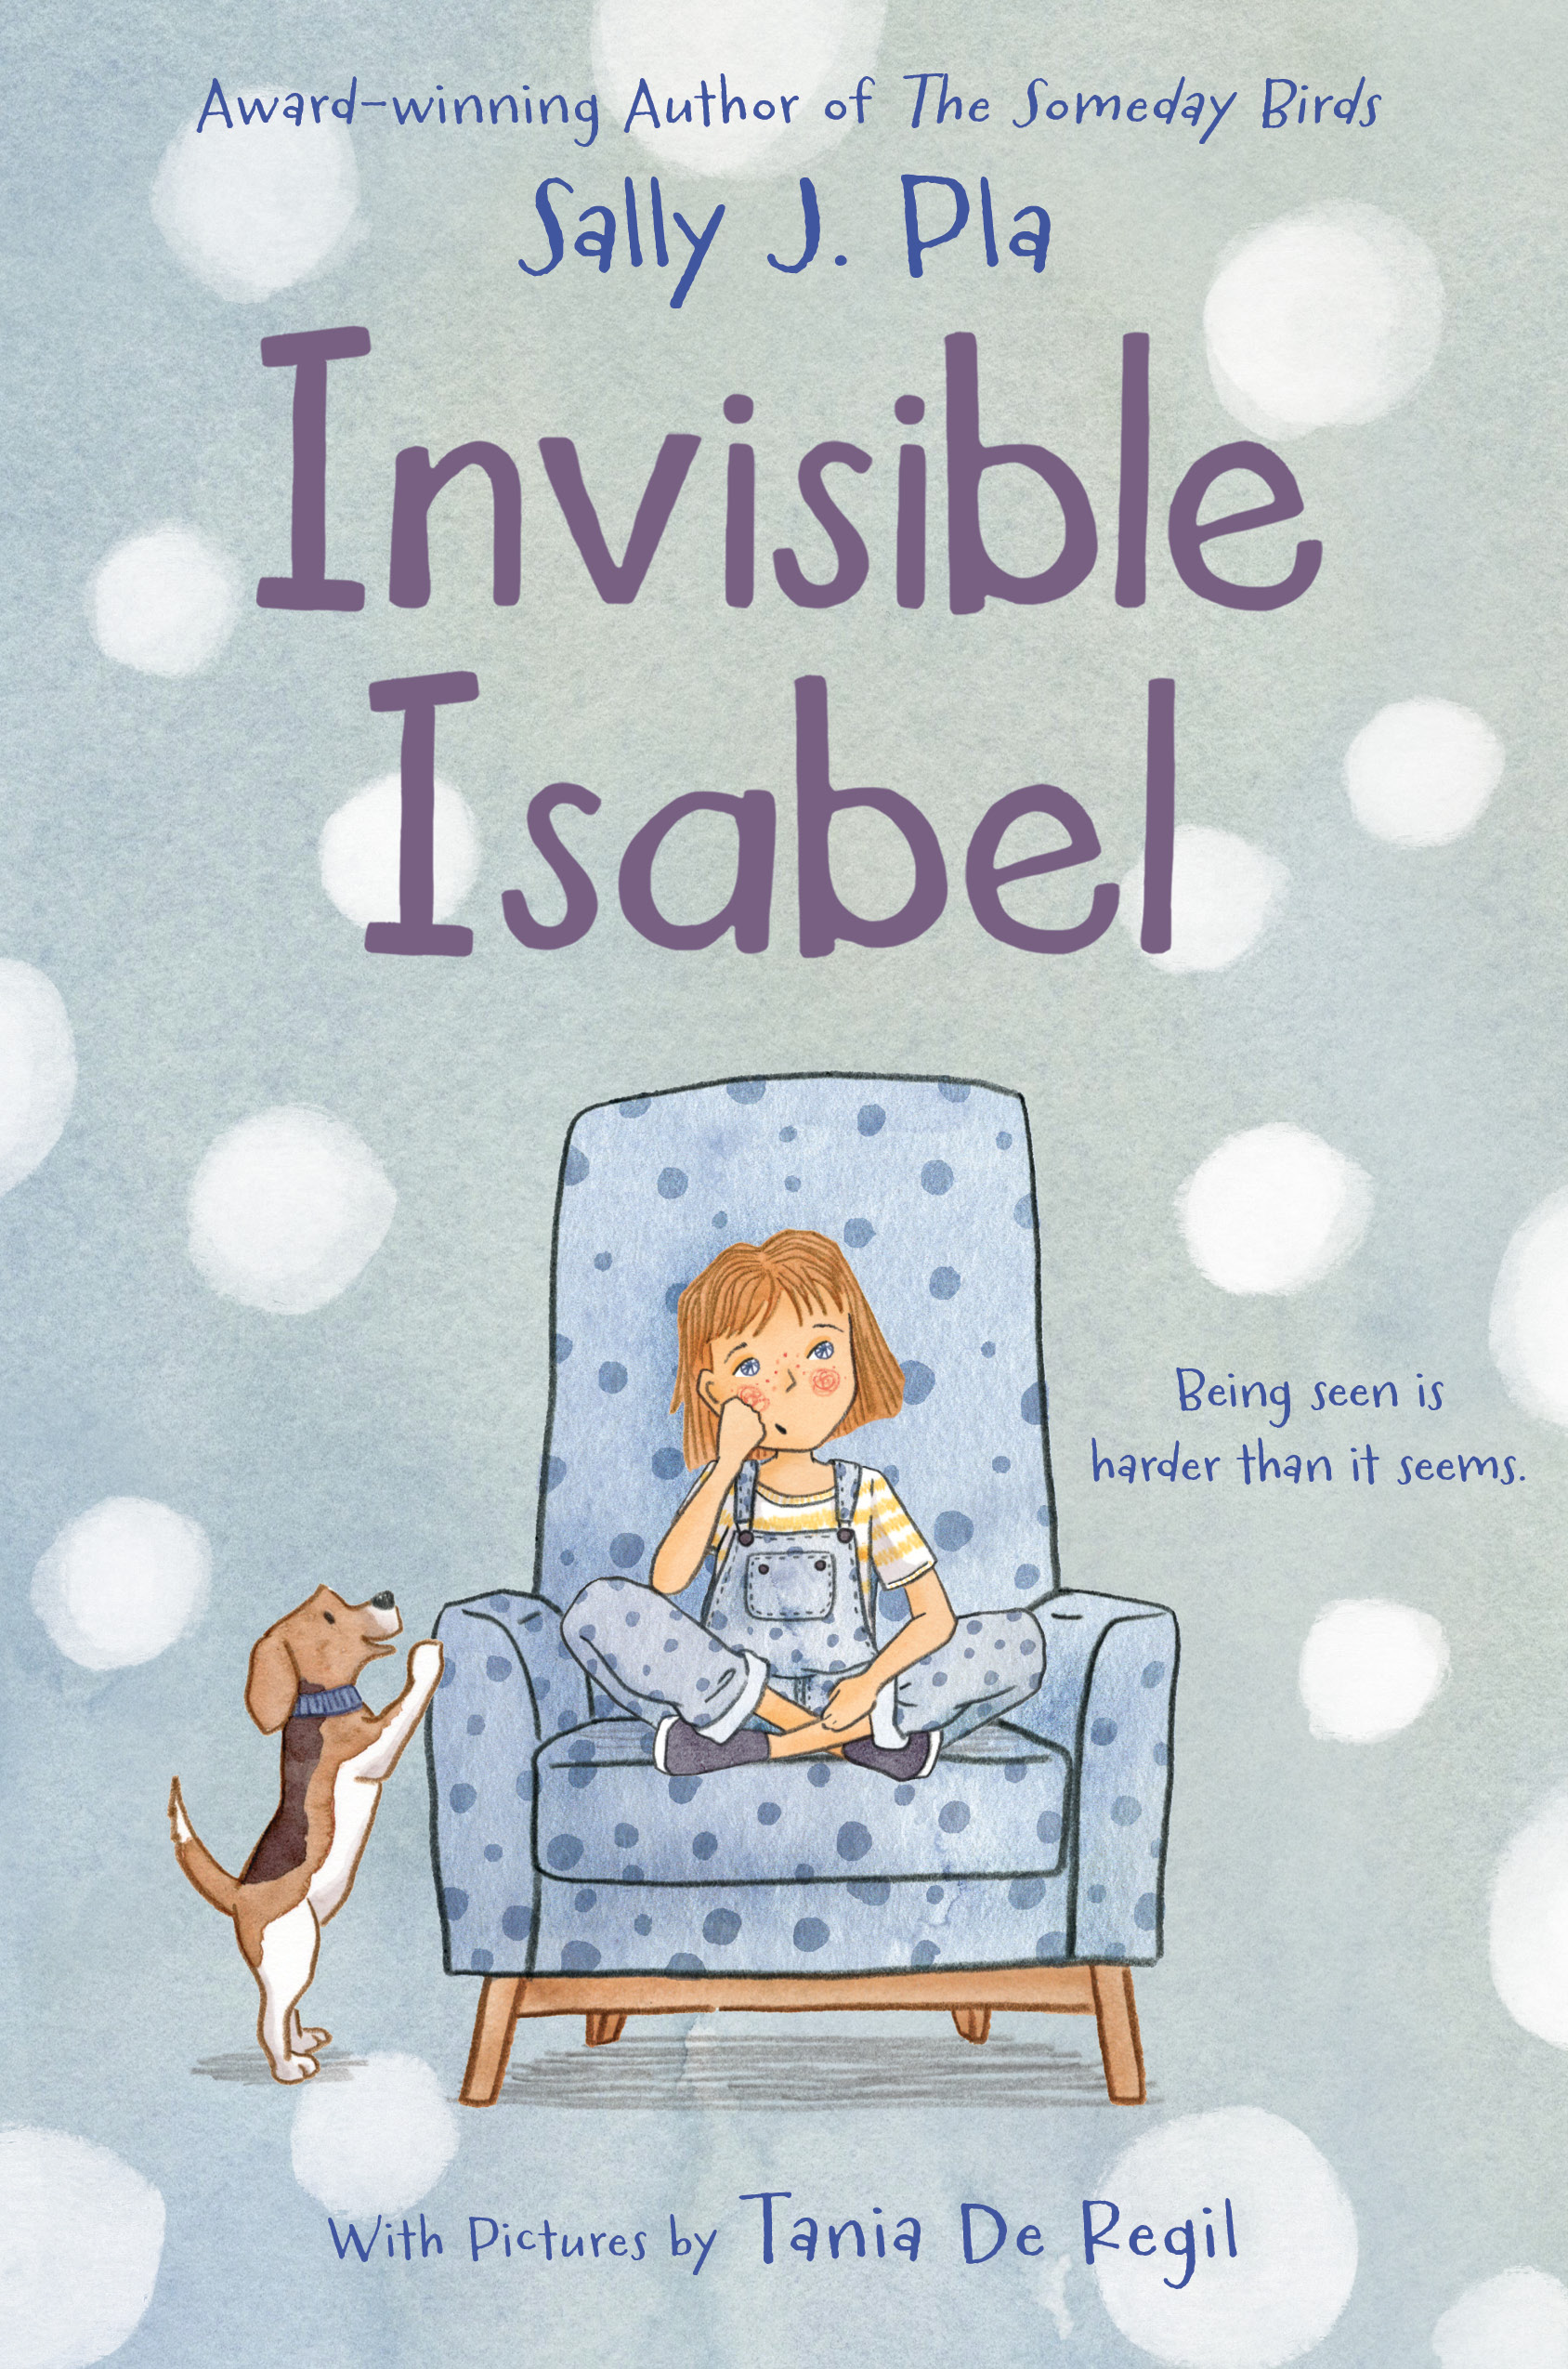 Author Chat with Sally J. Pla (INVISIBLE ISABEL), Plus Giveaway~ US ONLY!